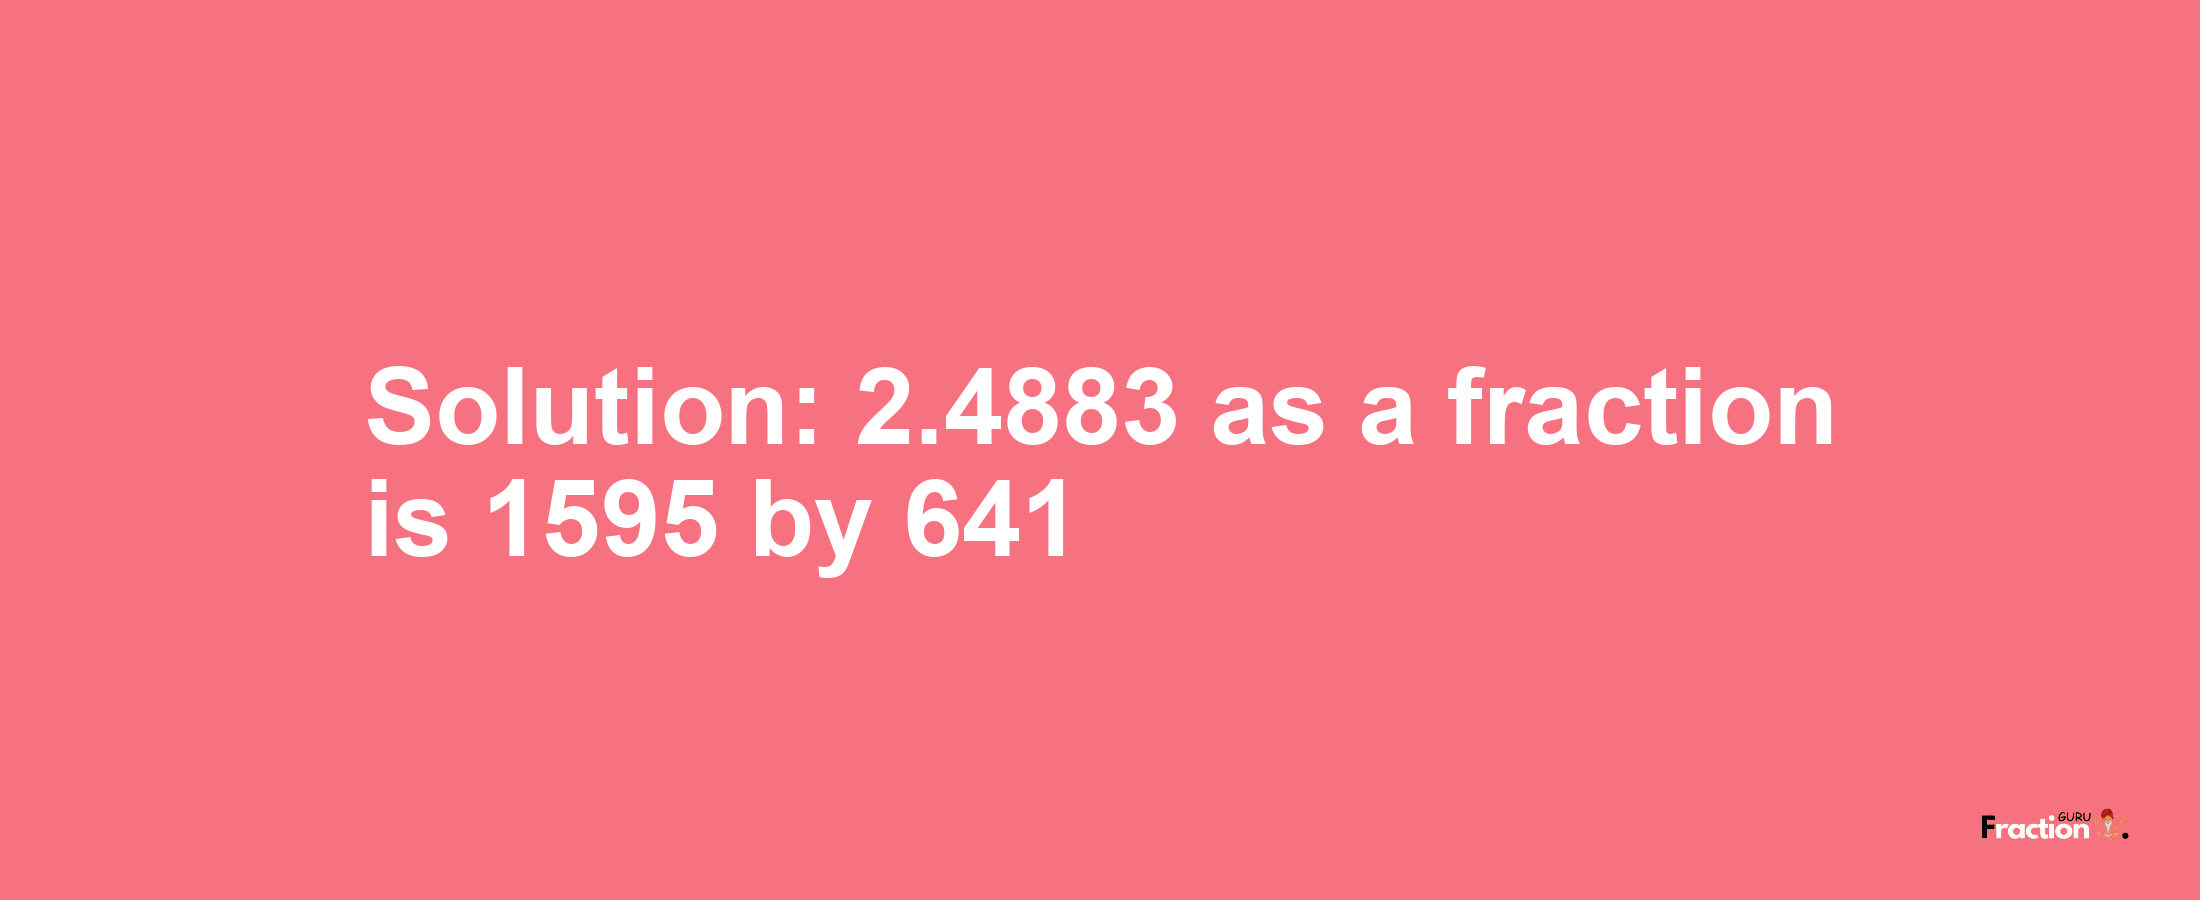 Solution:2.4883 as a fraction is 1595/641